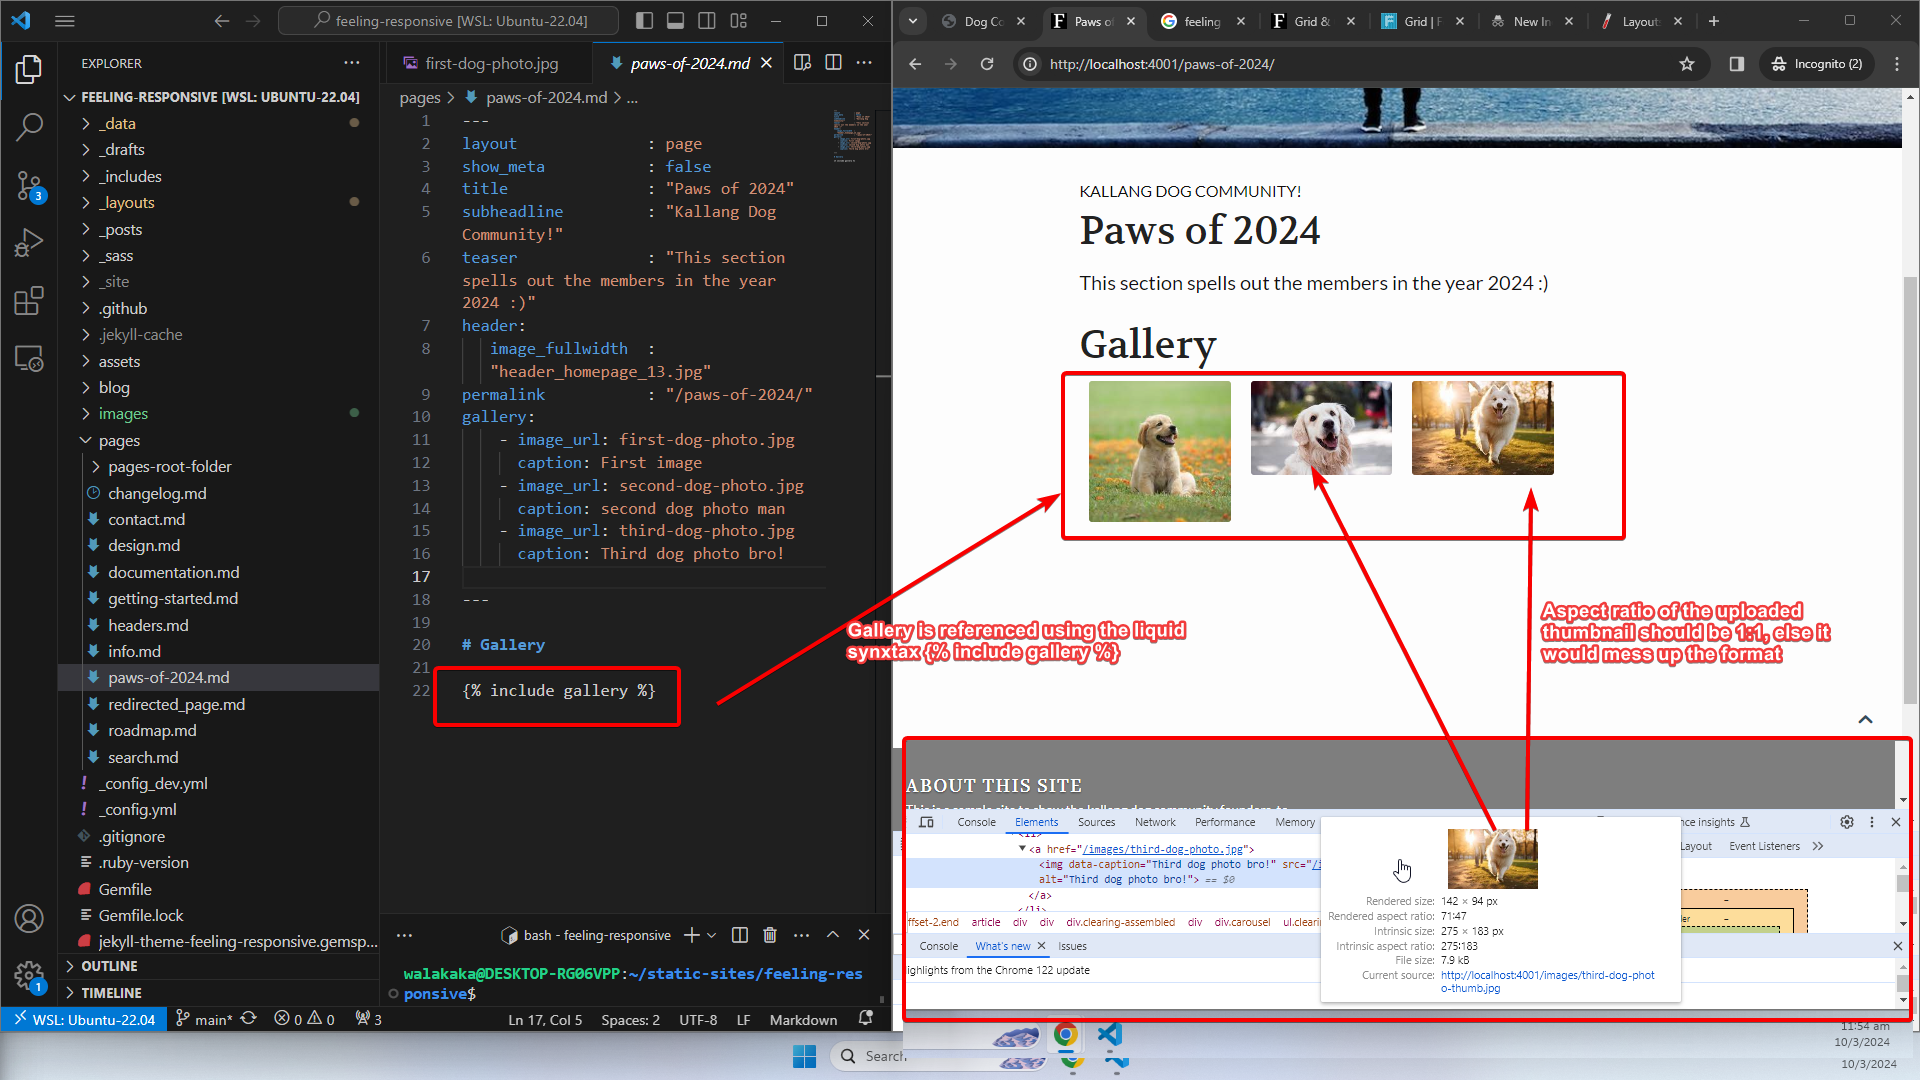 image showing how gallery is referenced in the article using the liquid syntax